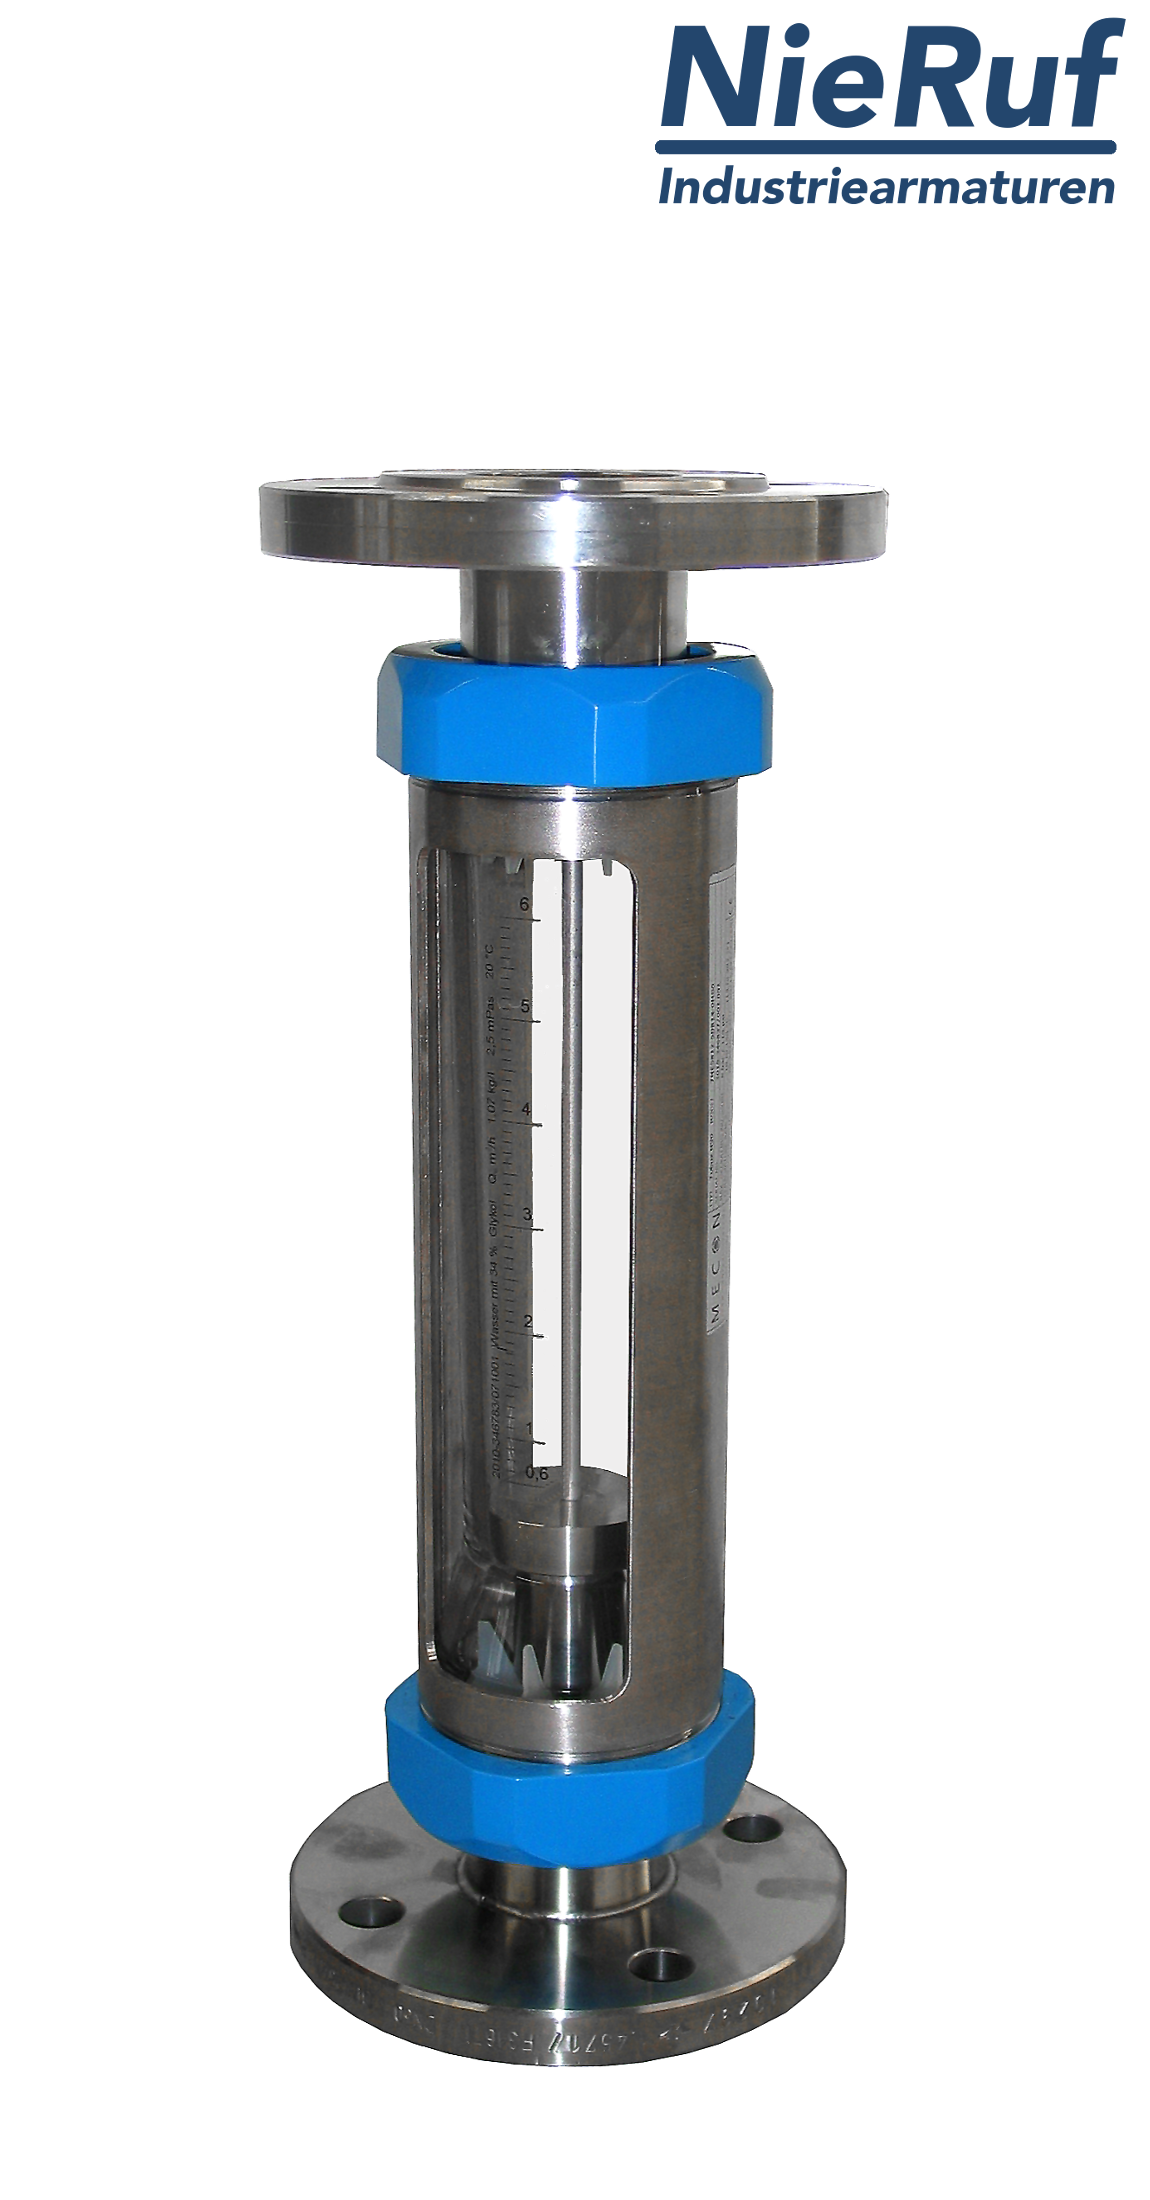 Variable area flowmeter stainless steel + borosilicate flange DN10 2.5 - 25.0 l/h water FKM